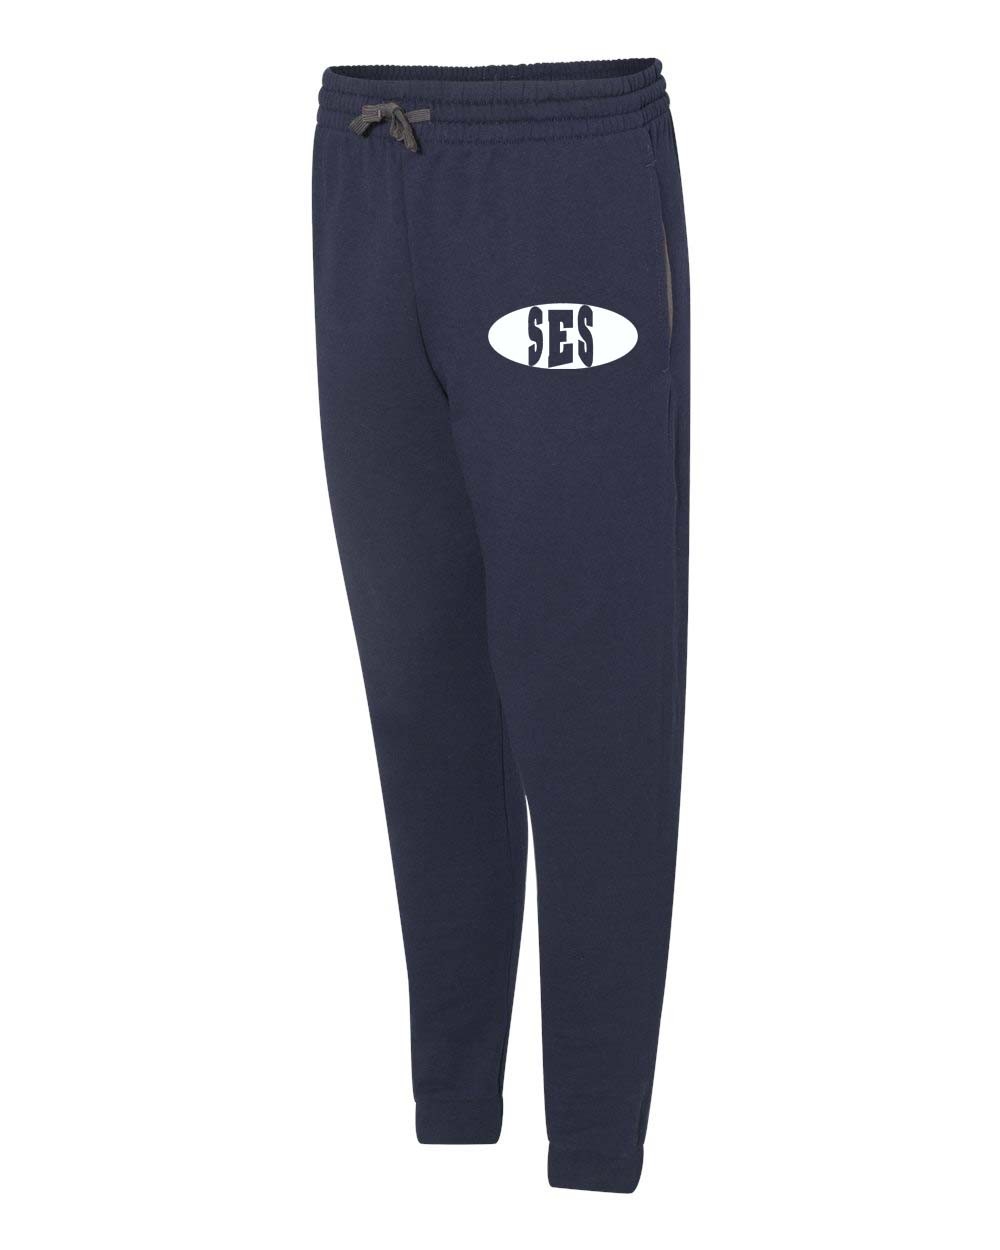 SES Spirit Joggers w/ Logo - Please Allow 2-3 Weeks for Delivery